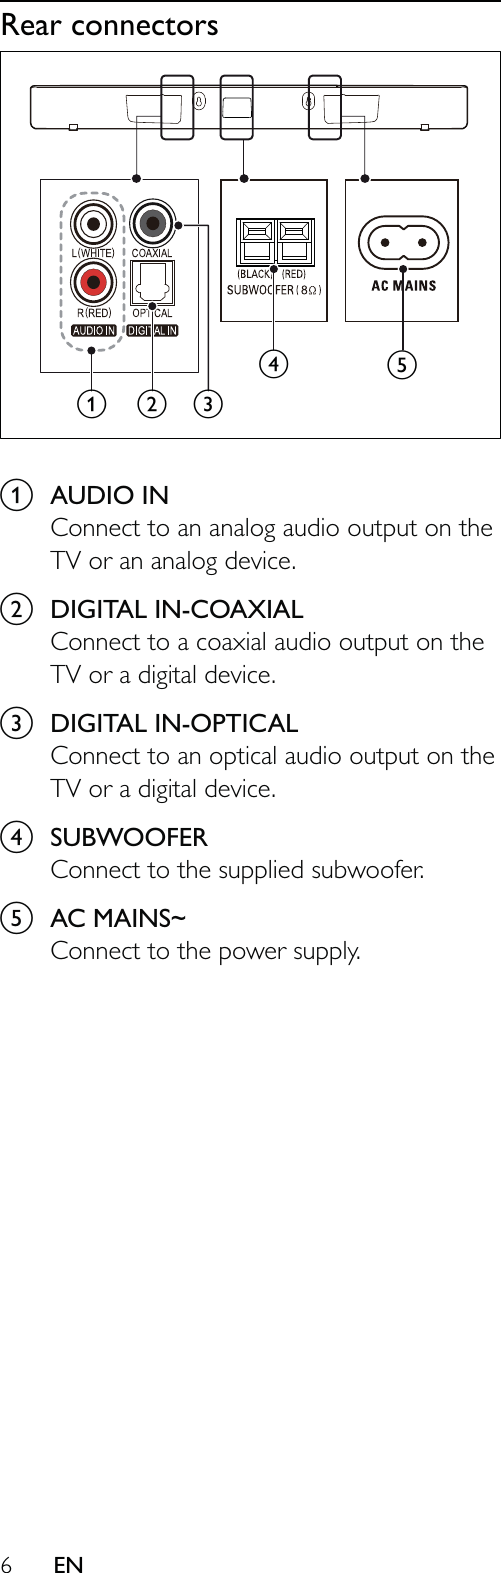 6ENRear connectors a  AUDIO INConnect to an analog audio output on the TV or an analog device. b  DIGITAL IN-COAXIALConnect to a coaxial audio output on the TV or a digital device. c  DIGITAL IN-OPTICALConnect to an optical audio output on the TV or a digital device. d  SUBWOOFERConnect to the supplied subwoofer.e  AC MAINS~Connect to the power supply.ebacd